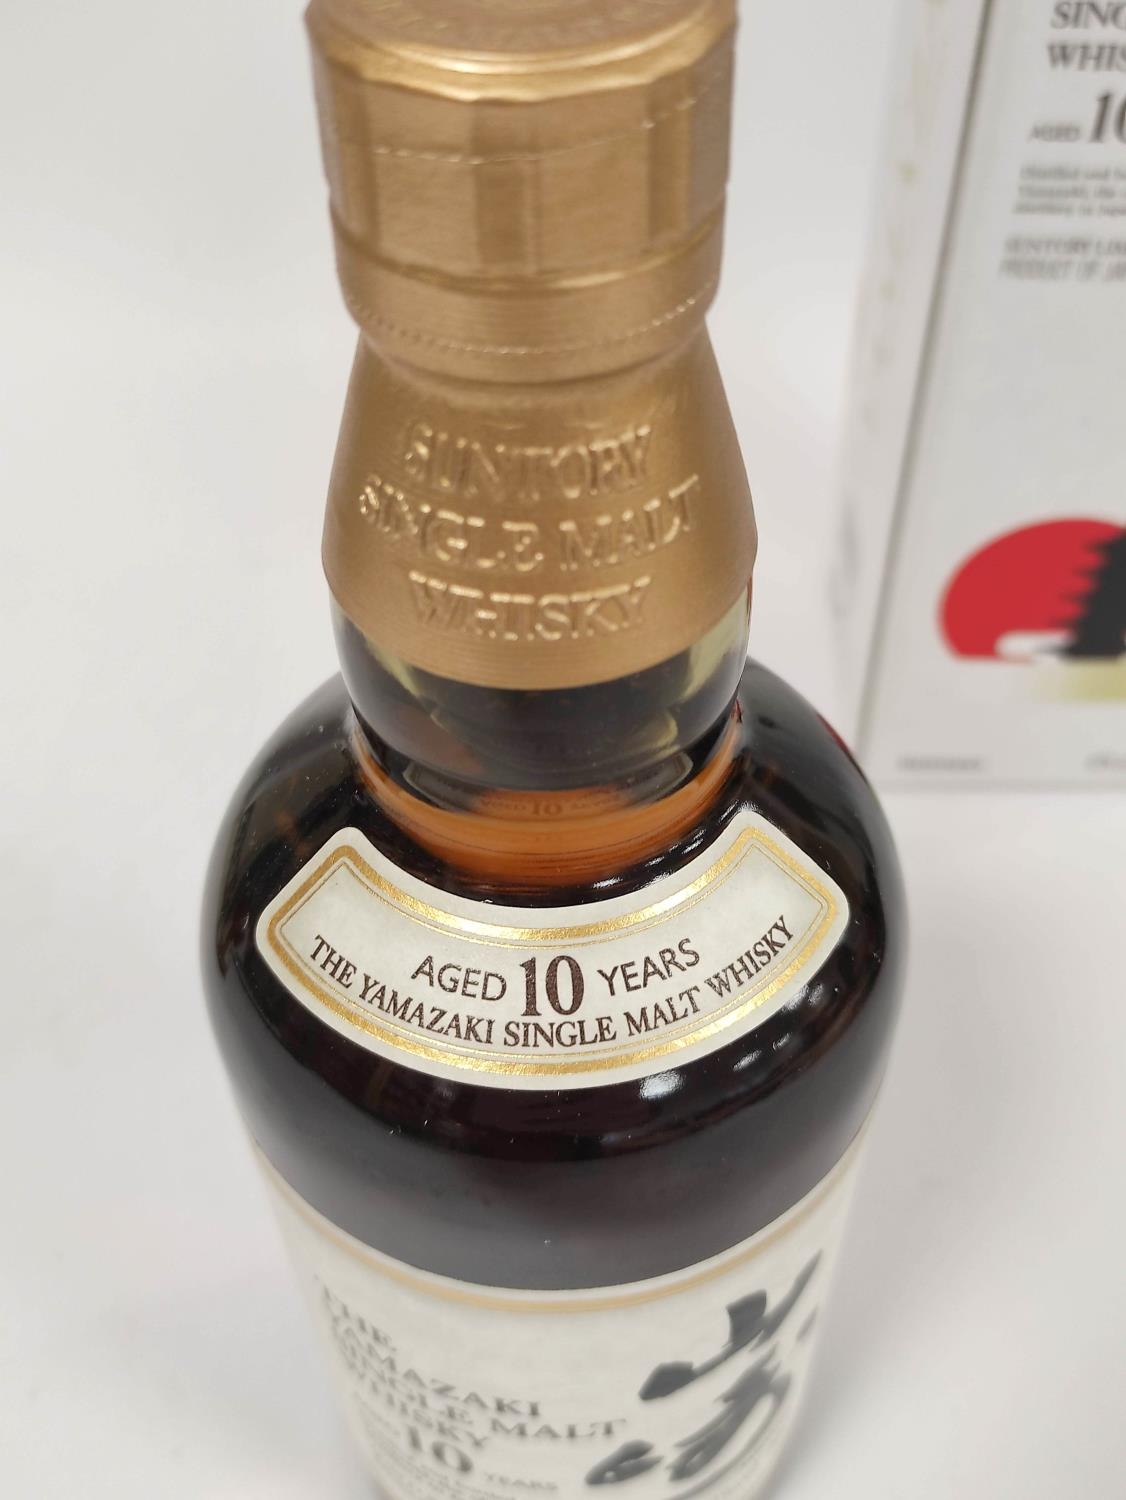 The Yamazaki 10 years old single malt Whisky, distilled and bottled in Japan, 70cl, 40% vol, boxed. - Image 3 of 5